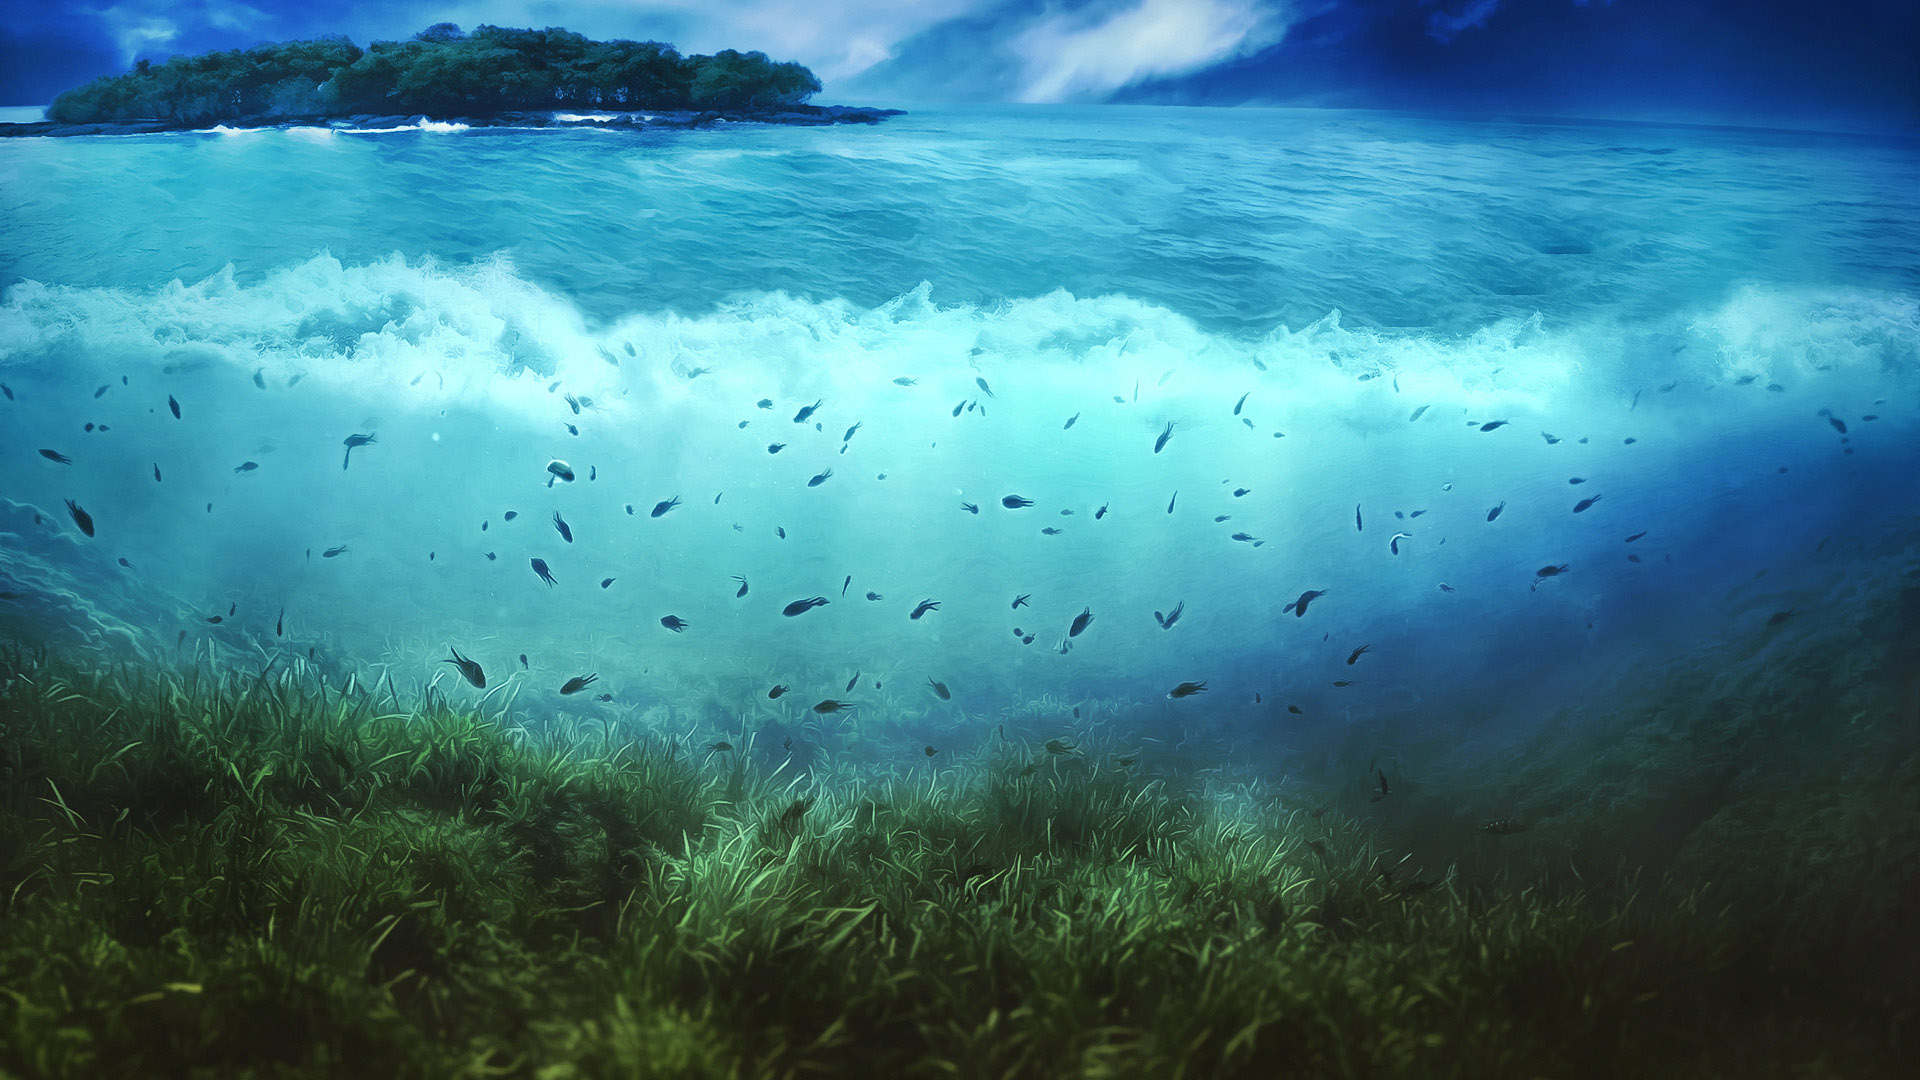 Wallpapers Imac Apple New Mac Underwater Spectacles Cool 1920x1080 ...